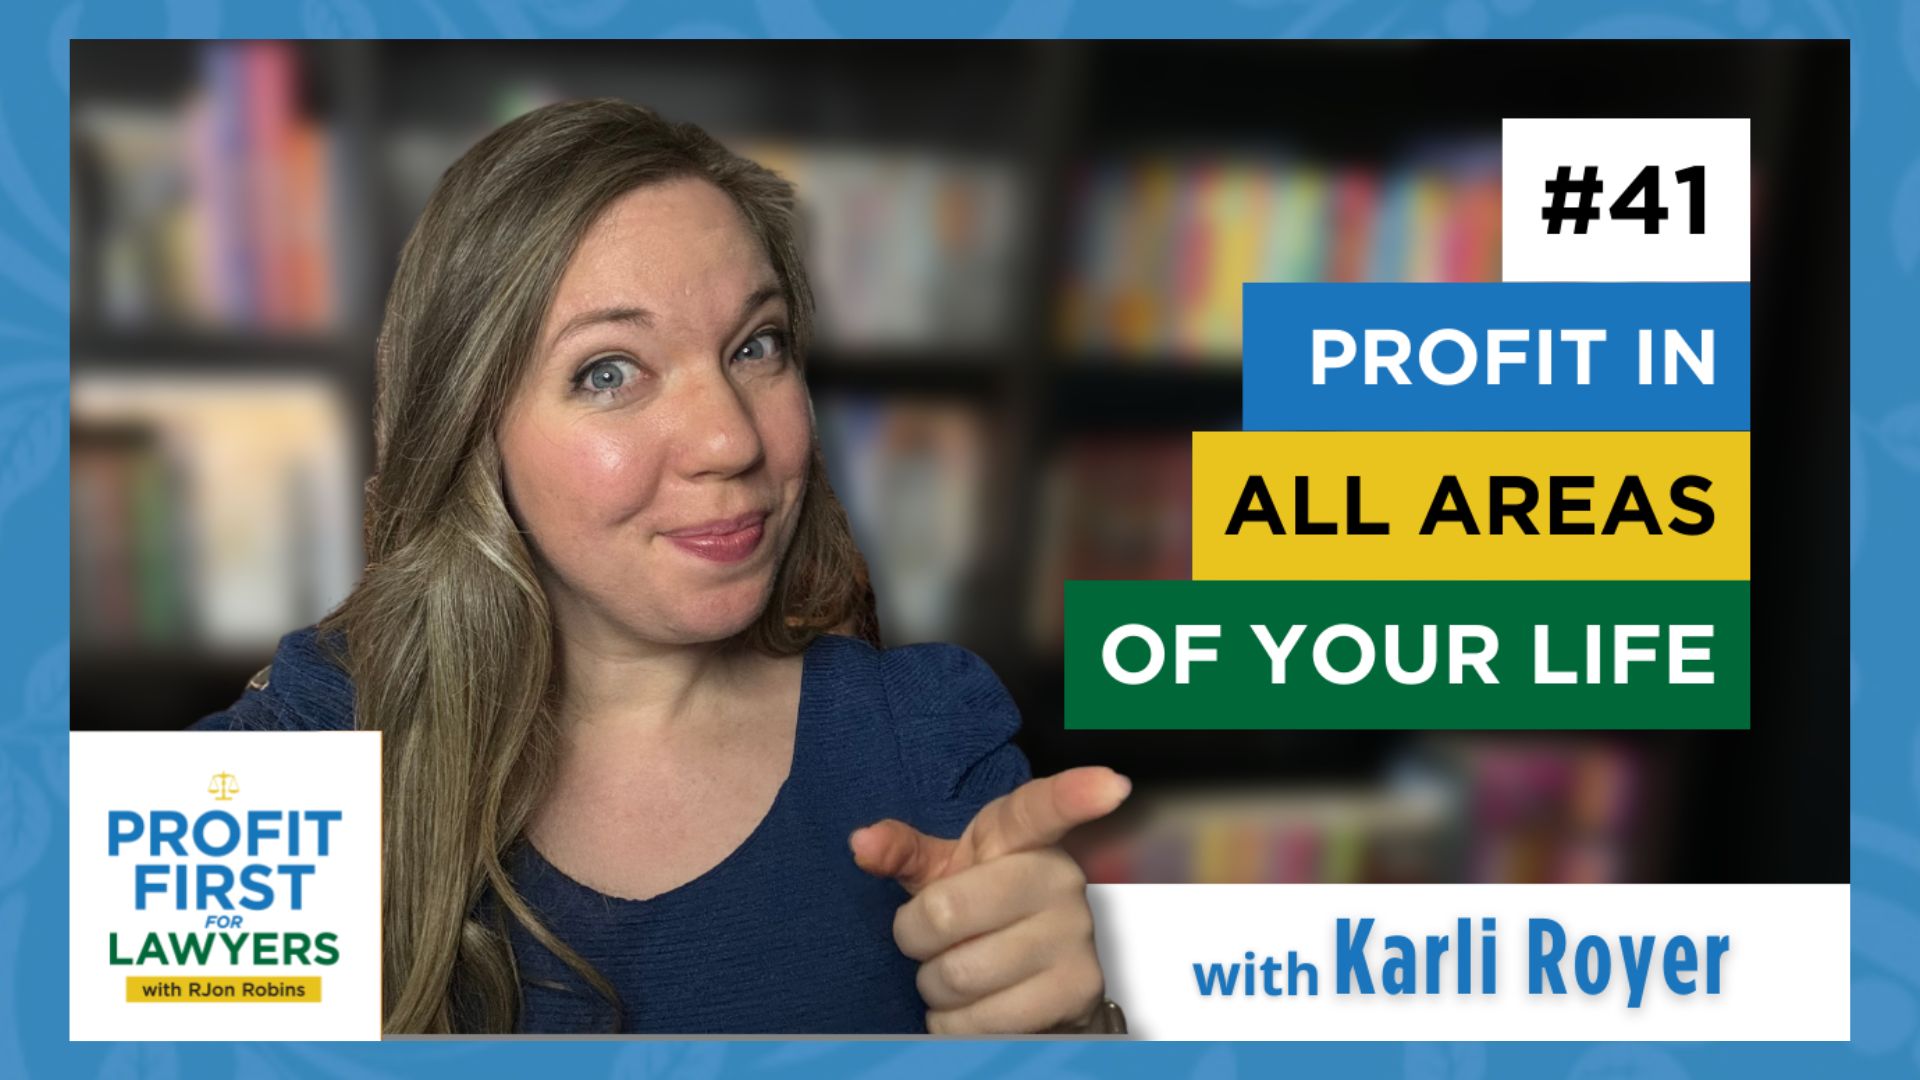 Featured image for episode 41: Karli Royer pointing forward at an angle. Her head is cocked to the side. She is smiling. Title of episode: Profit In All Areas Of Your Life. Blurred book shelf in background. Profit First For Lawyers album art/logo.